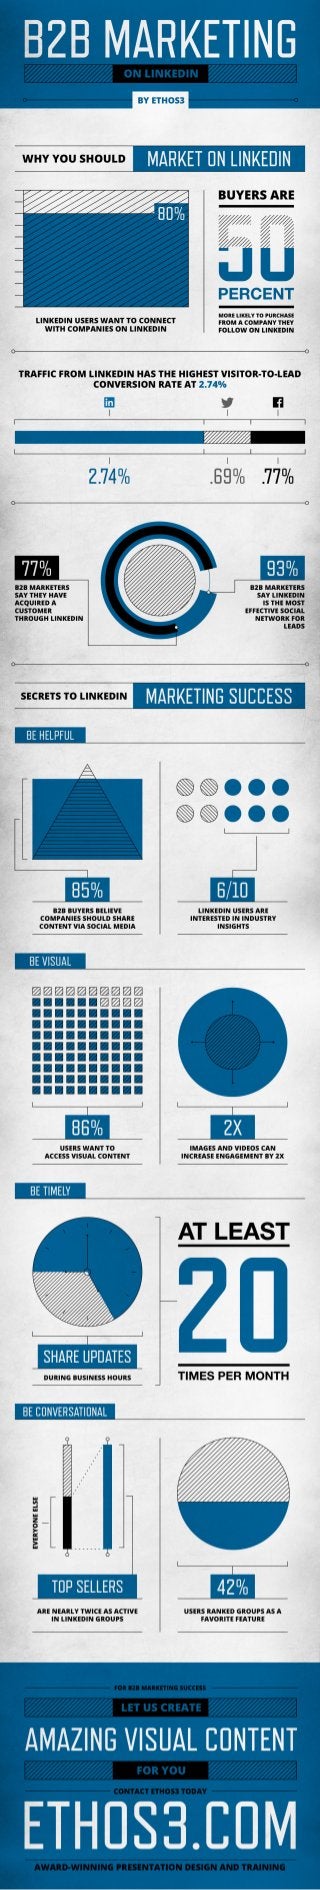 How To Succeed at B2B Marketing on LinkedIn (Infographic)